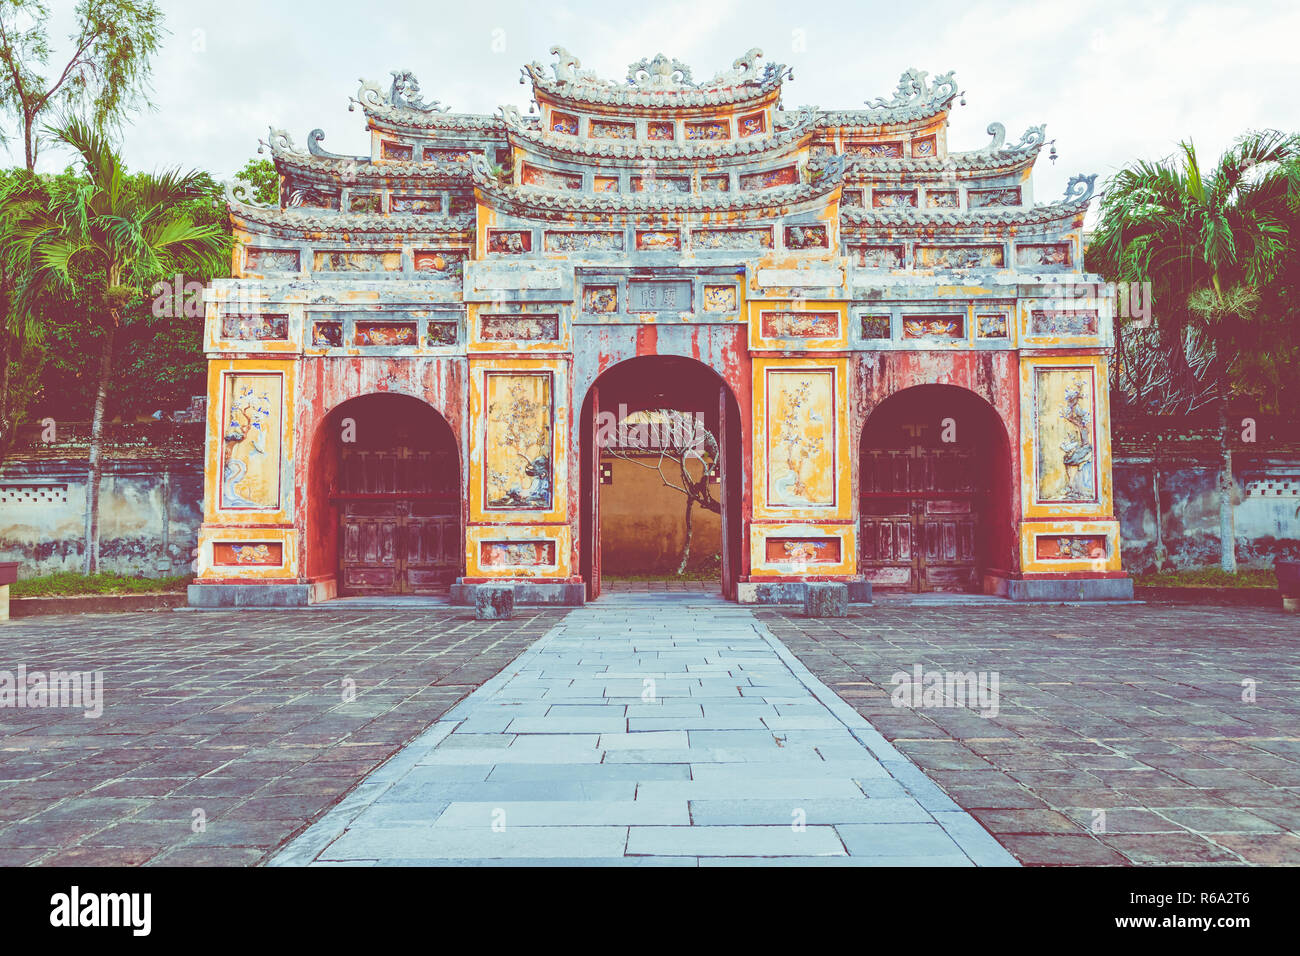 Imperial Royal Palace of Nguyen dynasty in Hue, Vietnam. Unesco World Heritage Site. Stock Photo